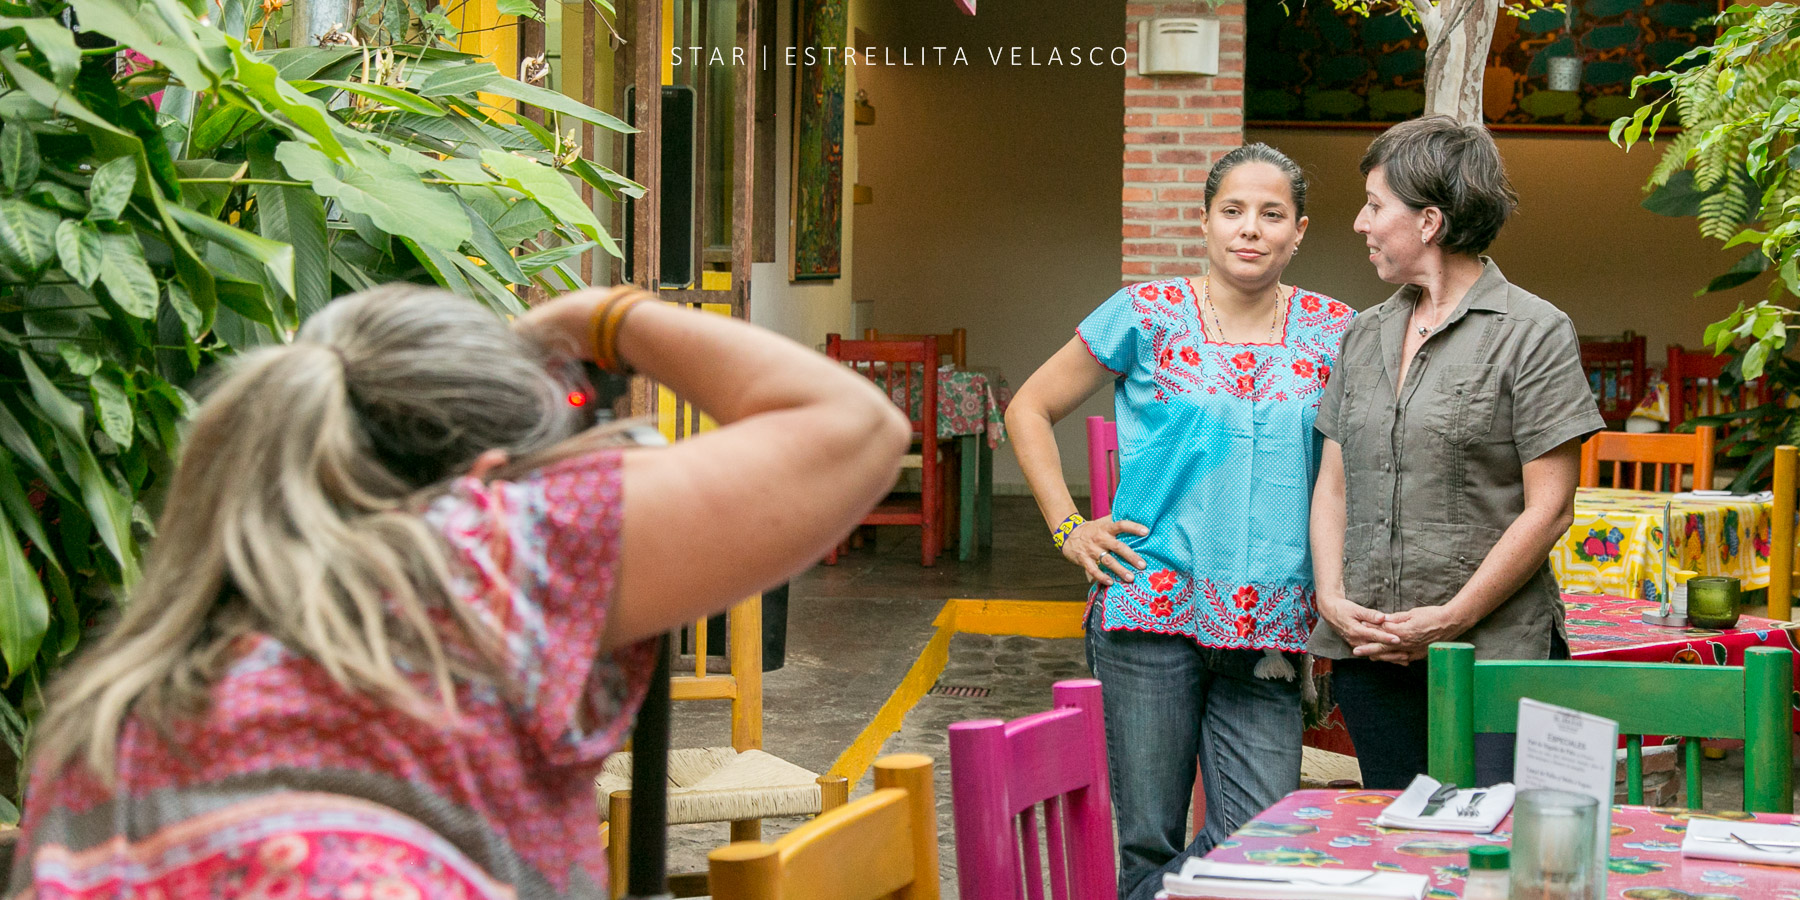 Puerto Vallarta Cultural Walking Tours by Local Guides who love Vallarta